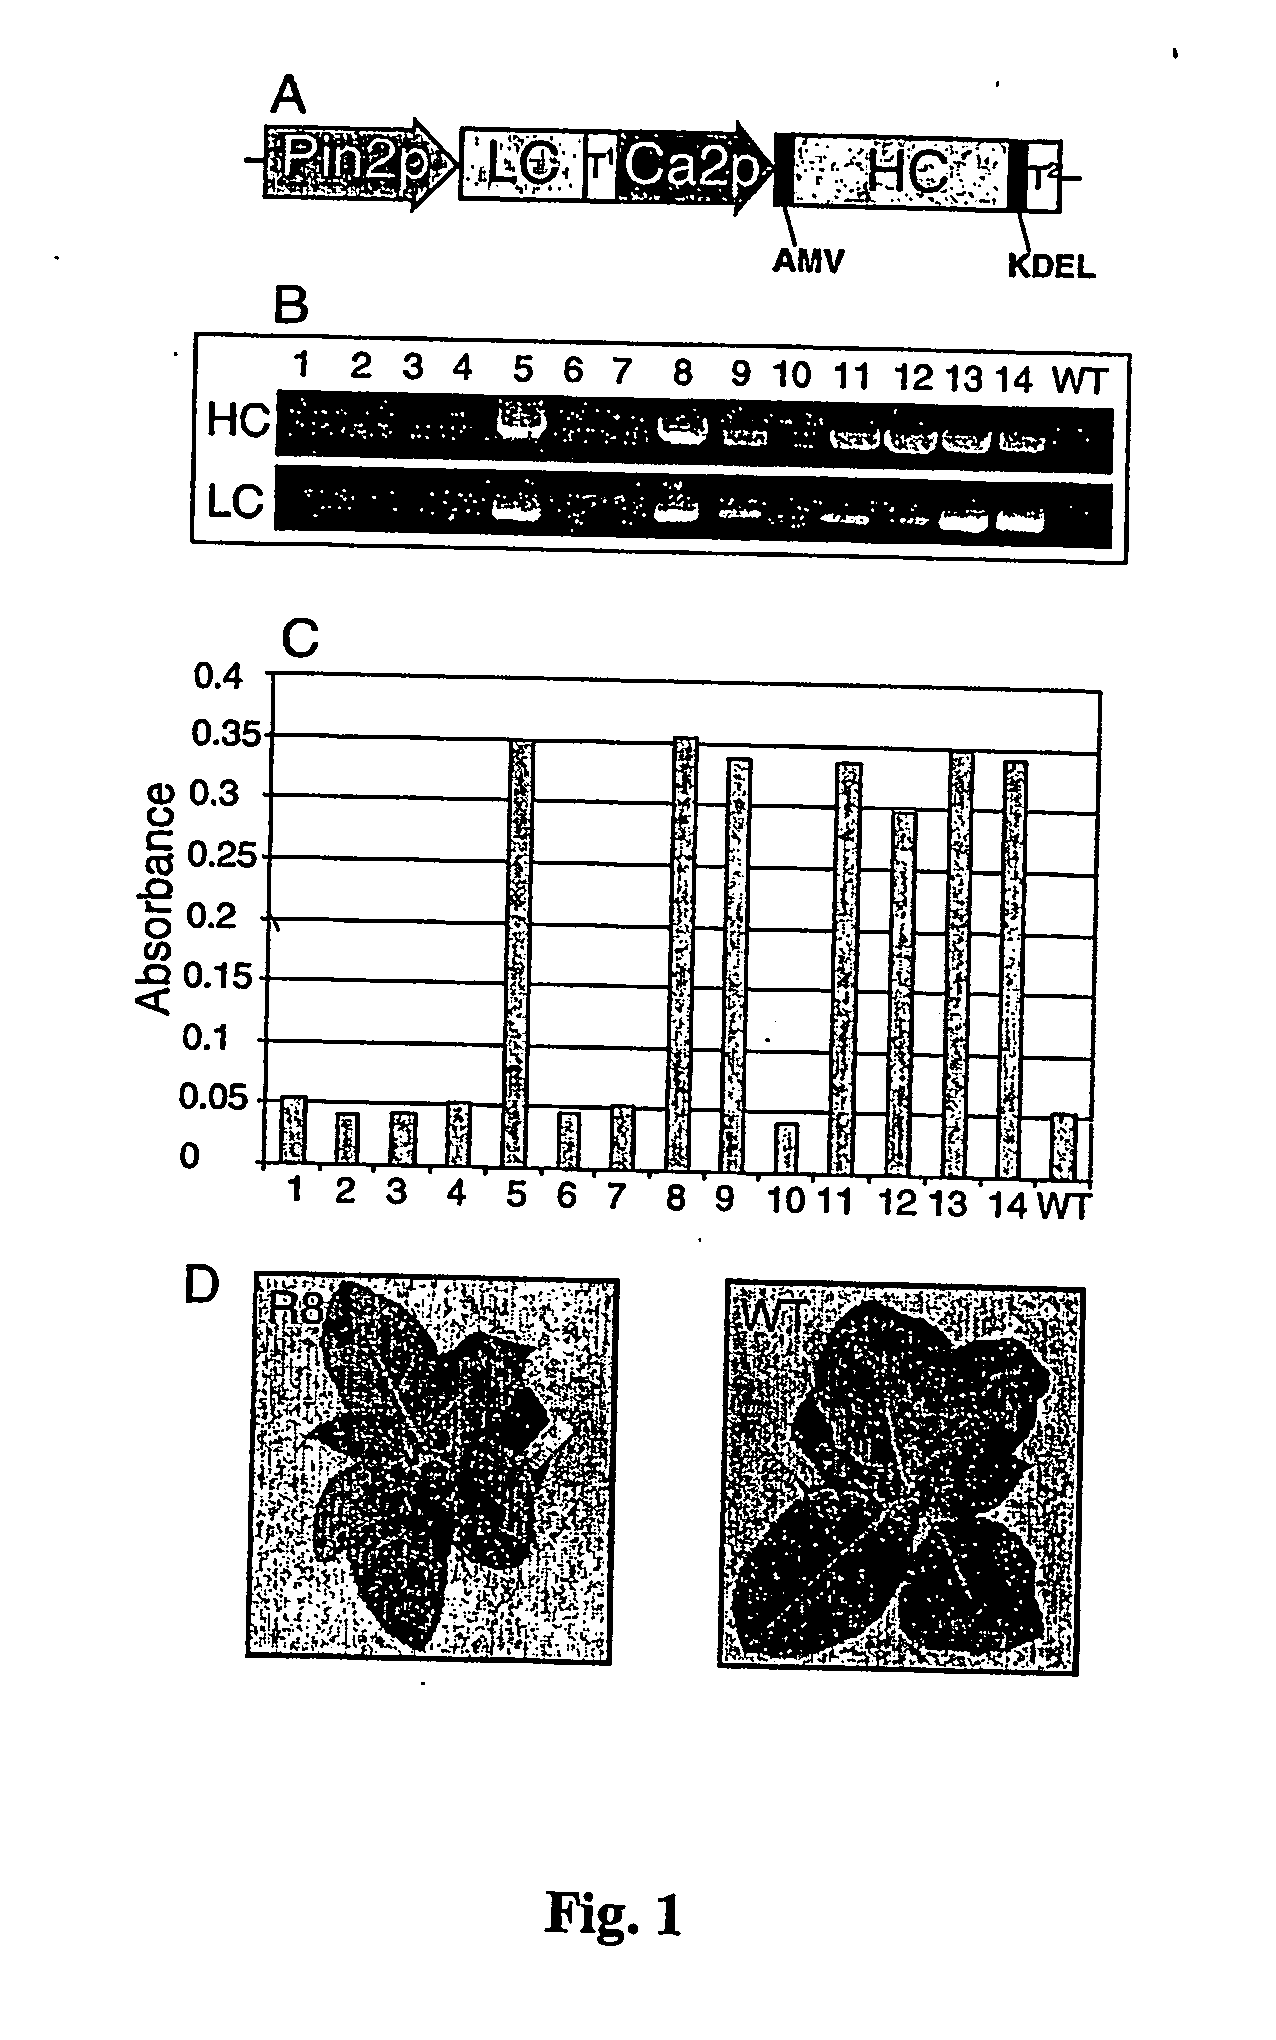 Production of rabies antibodies in plants